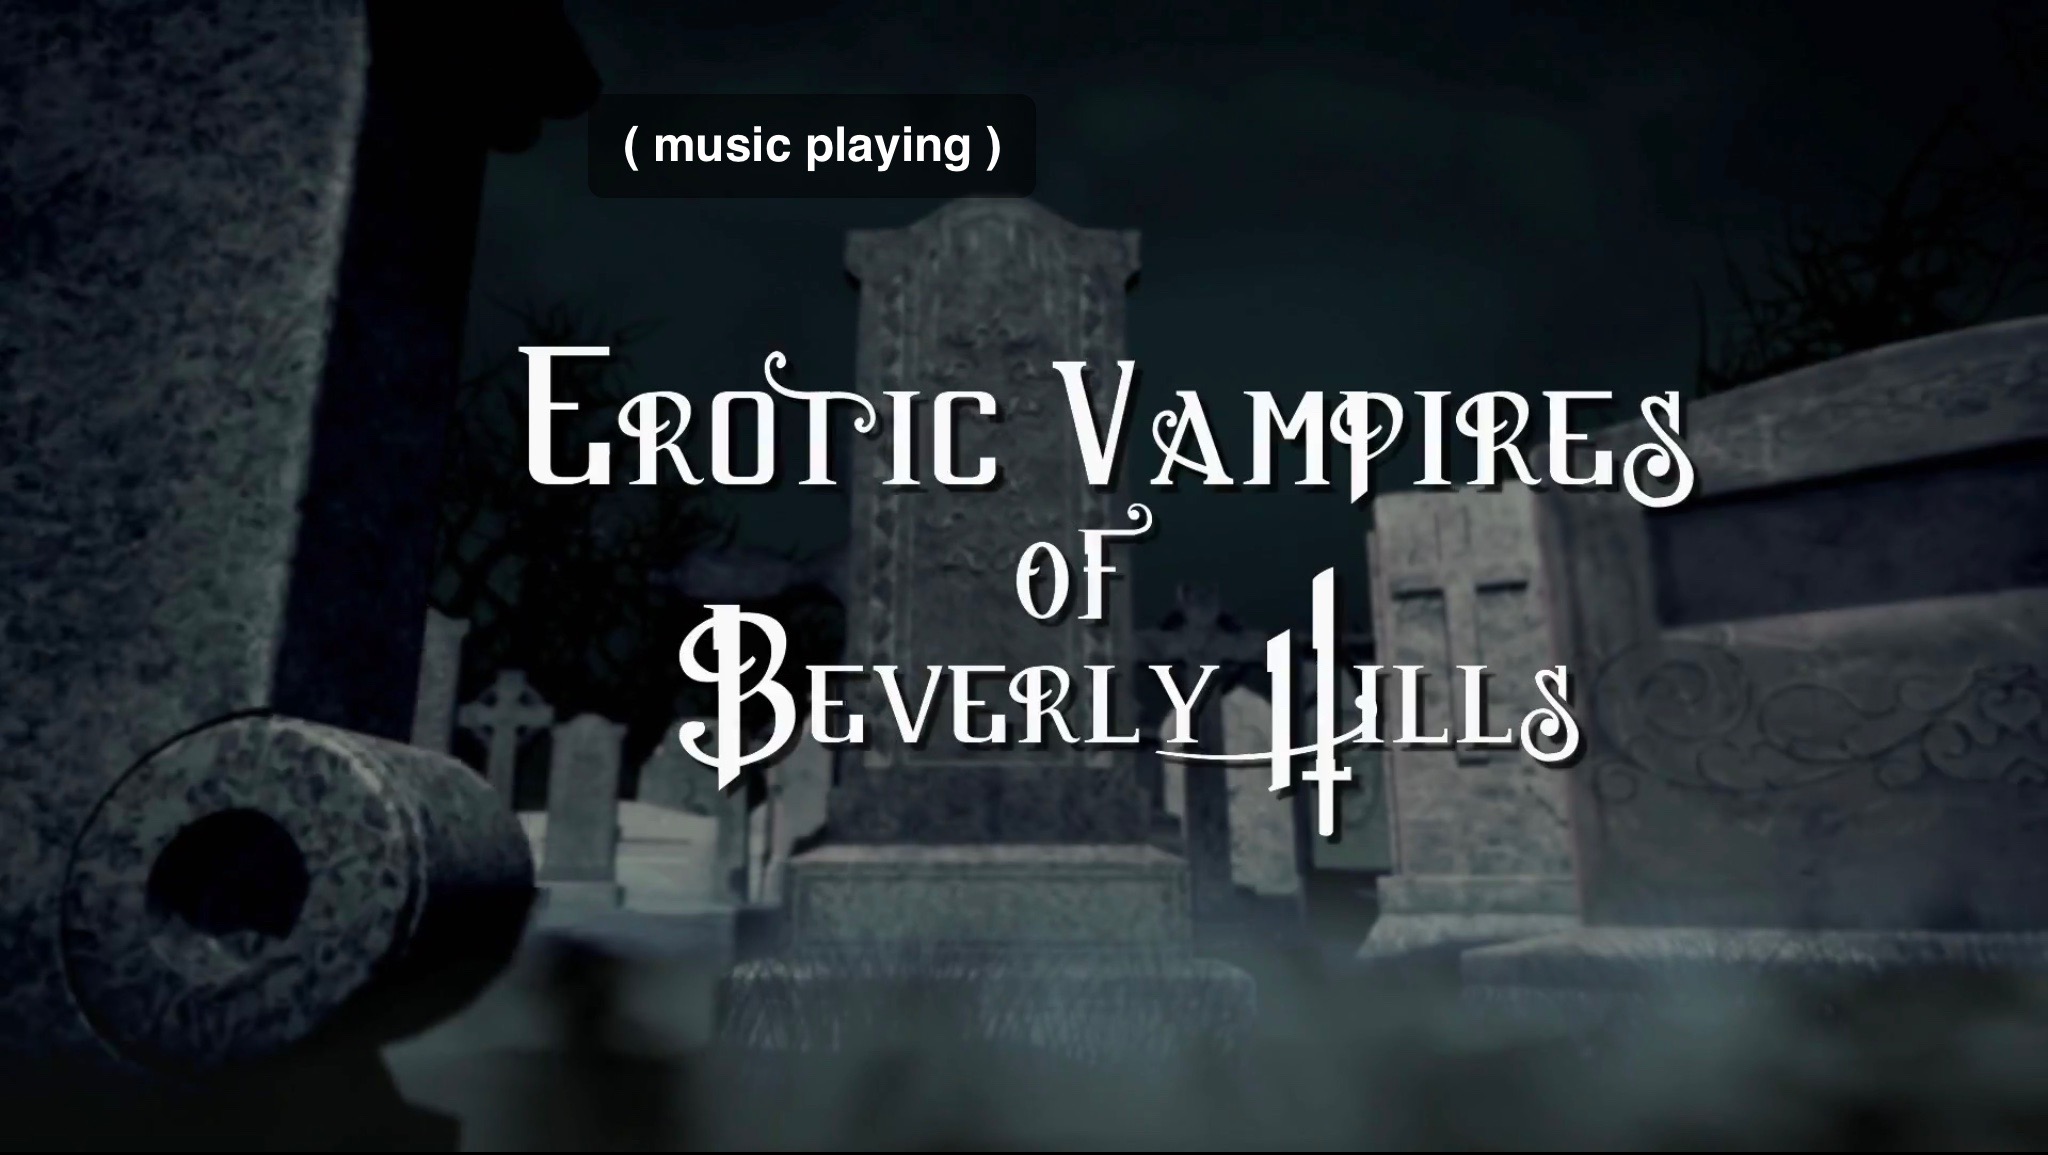 andrea myers recommends erotic vampires of beverly hills cast pic